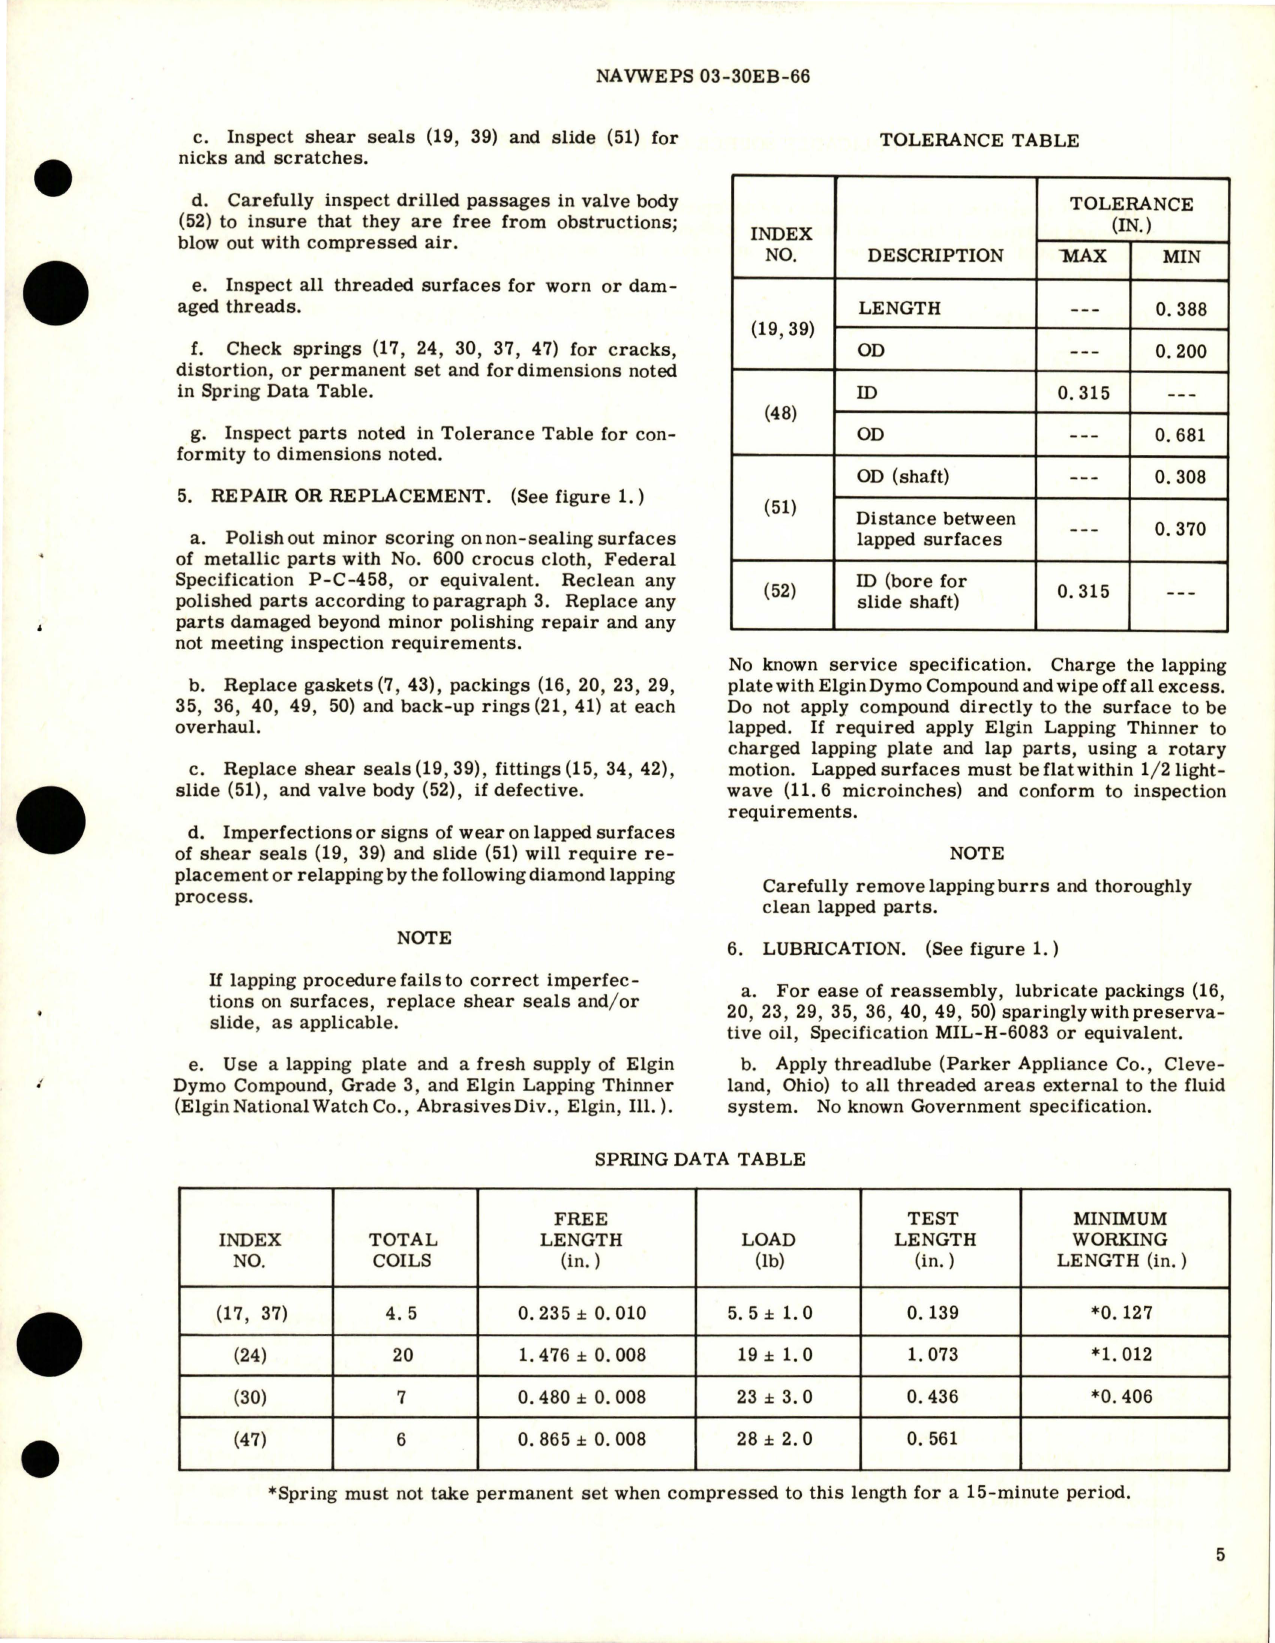 Sample page 5 from AirCorps Library document: Overhaul Instructions with Parts for Solenoid Actuated Slide Selector Valve Assembly - Part 20772